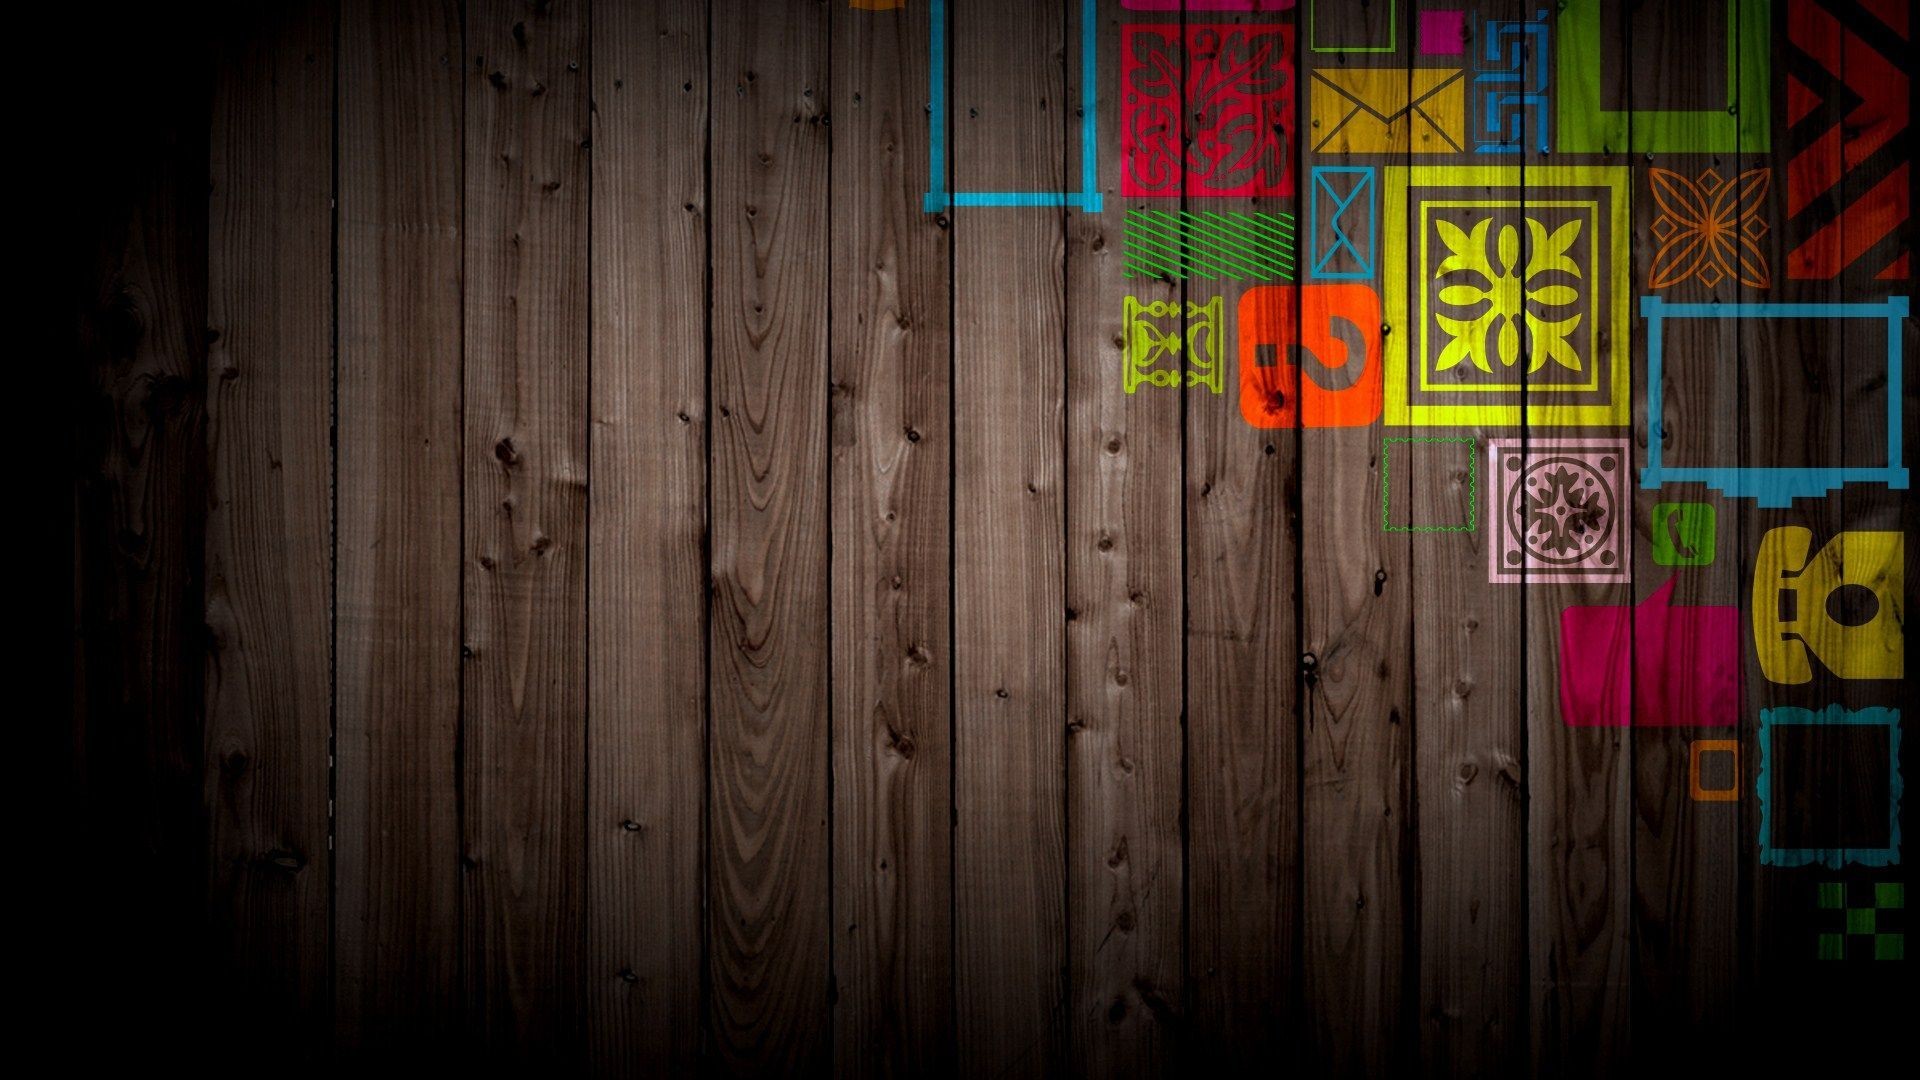 1920x1080 Download Cool Wooden Wall Cool Twitter Backgrounds Wallpaper .